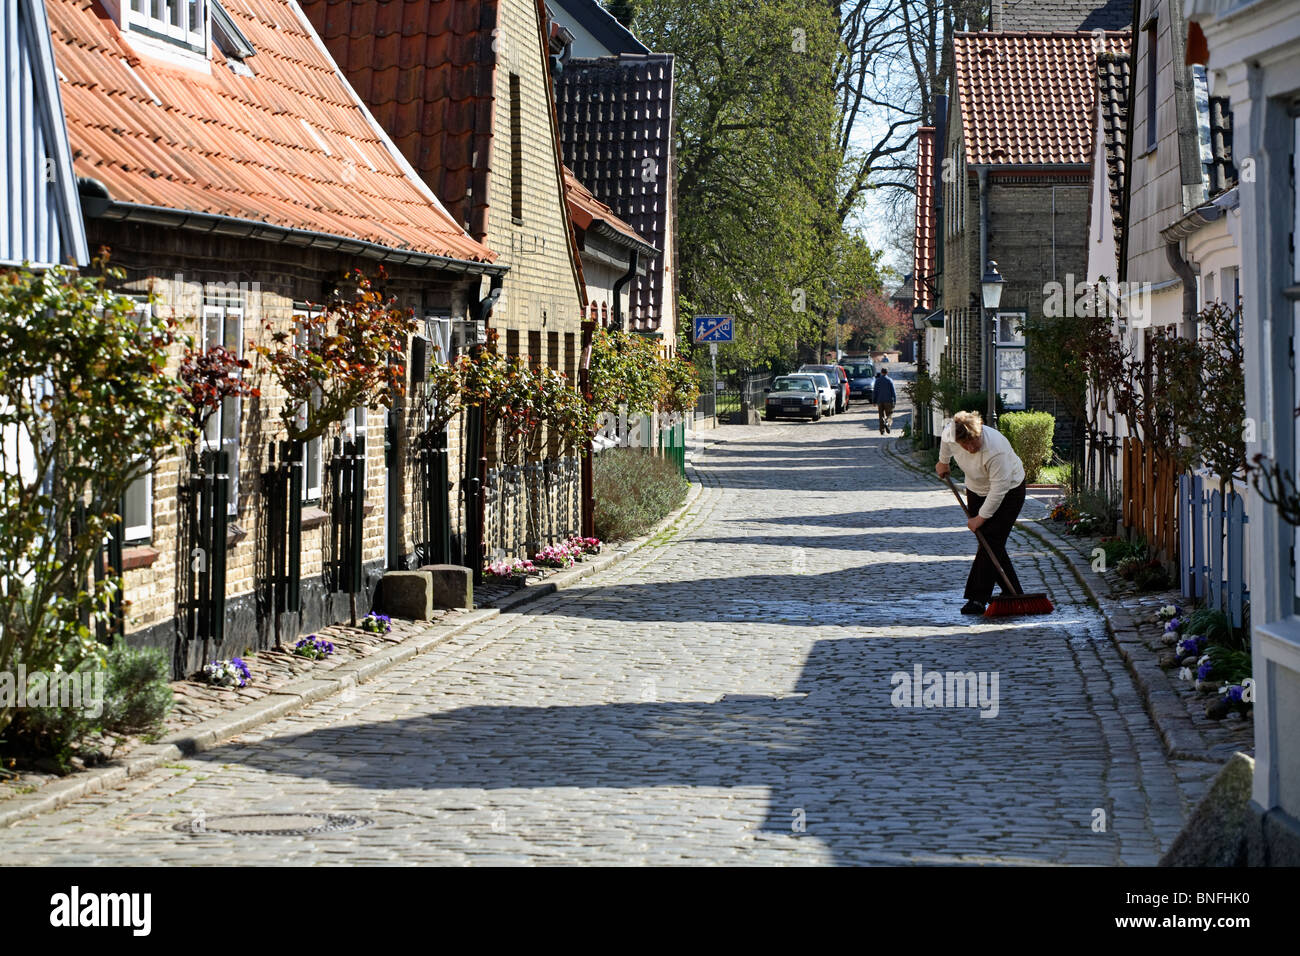 View at the facades of houses in Holm, Schleswig, Germany Stock Photo